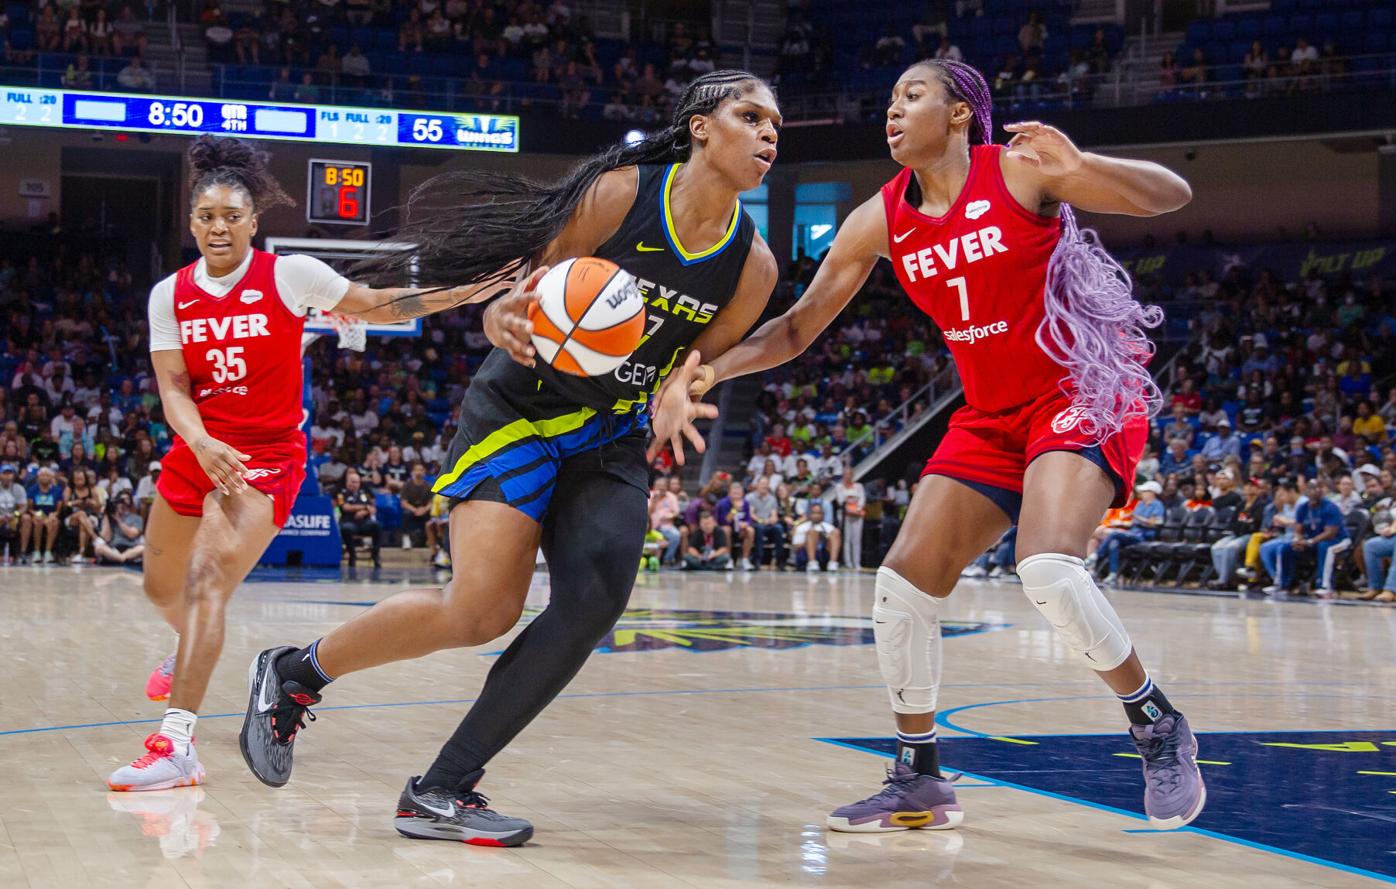 After questioning safety of upcoming WNBA season, Sky assistant